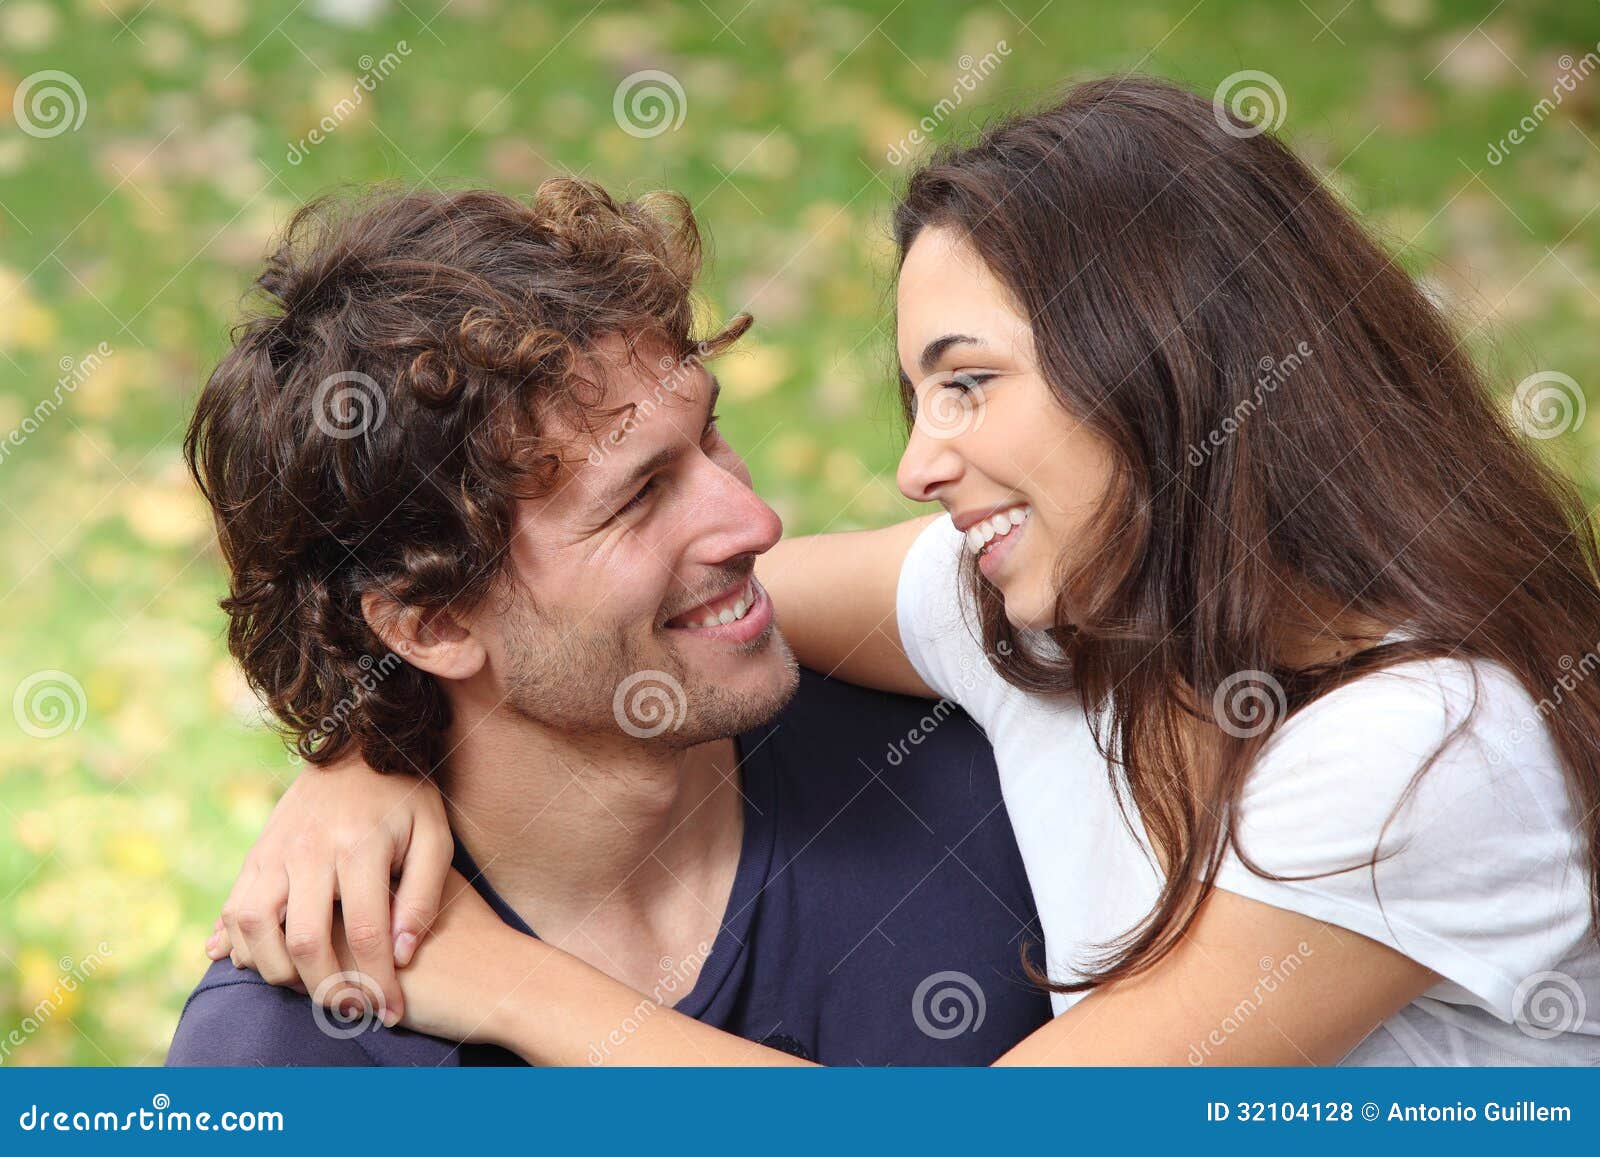 couple cuddling and flirting in a park